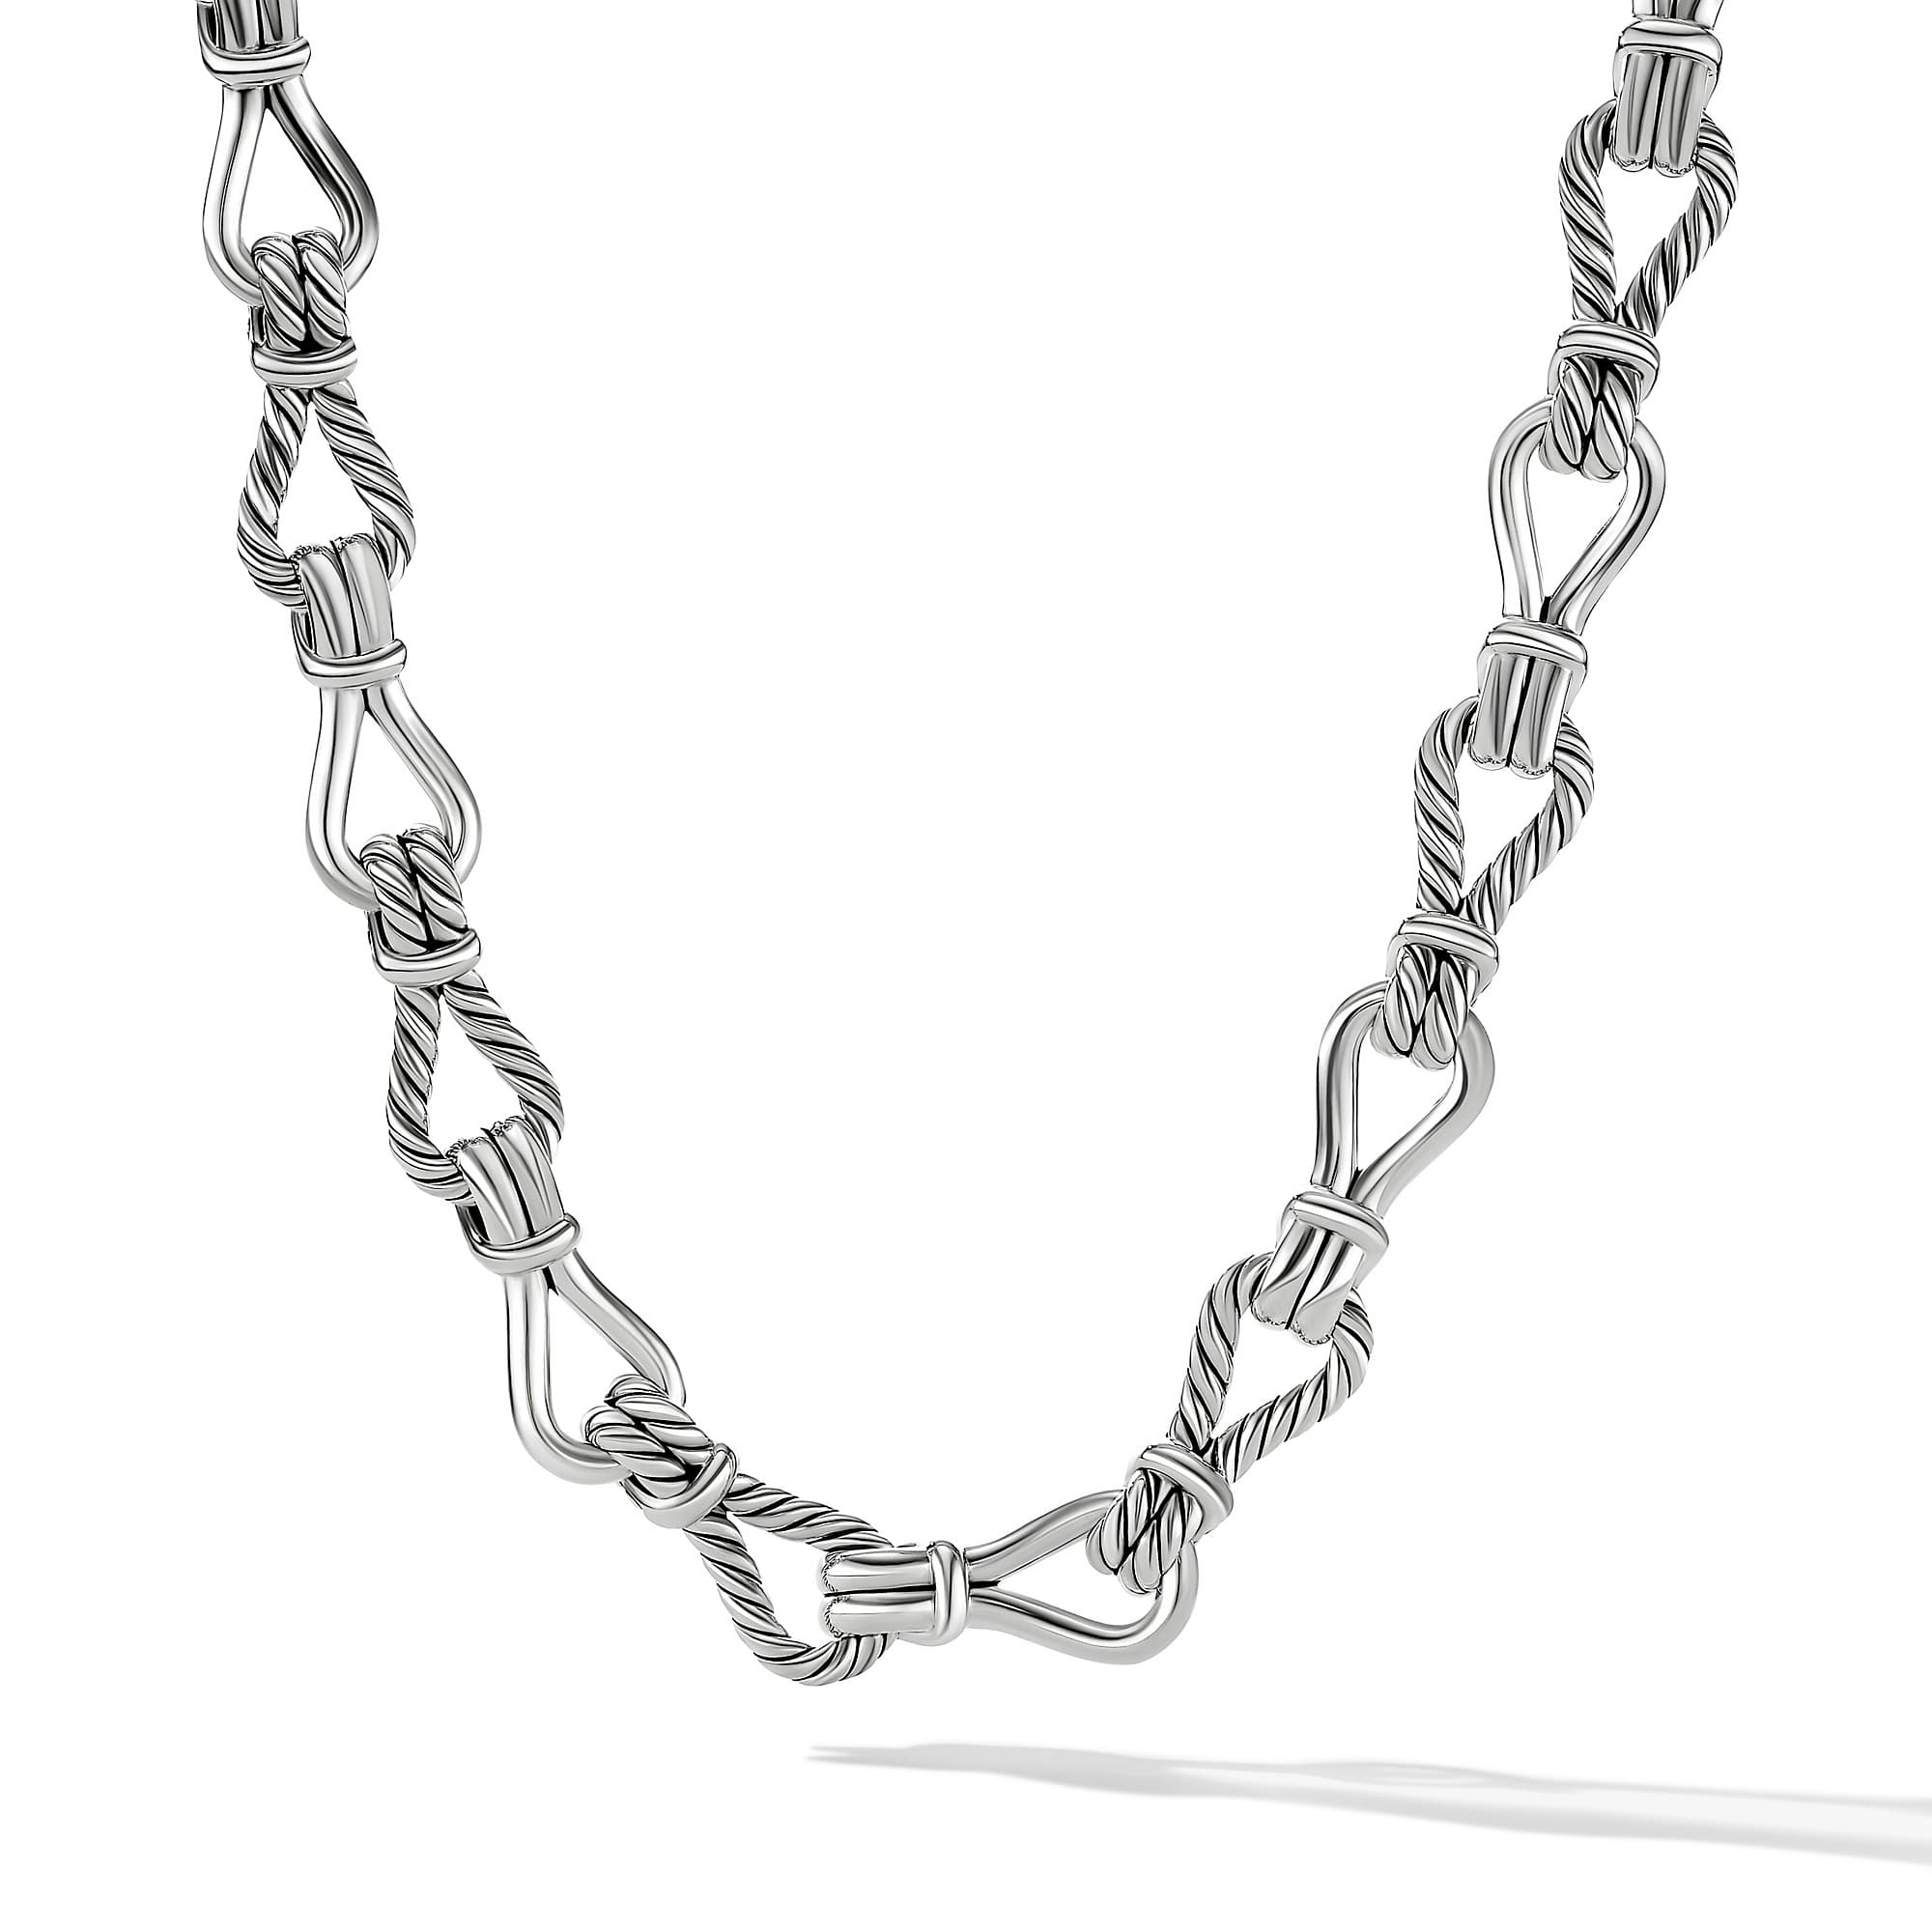 David Yurman Thoroughbred Loop Chain Link Necklace, 18 inches